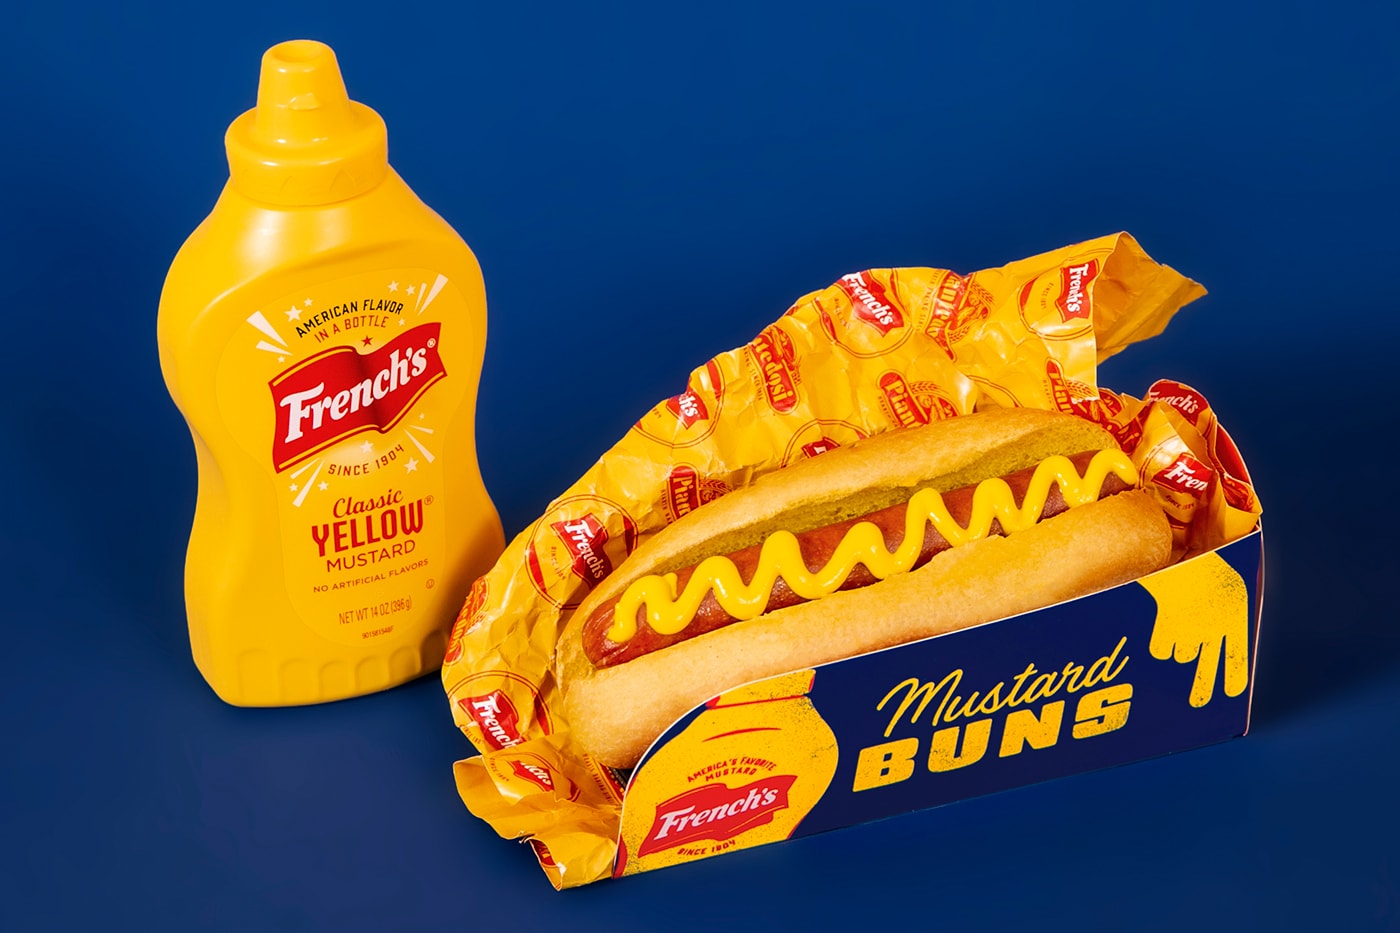 French's Limited Edition Mustard Buns Release info National Mustard Day August 7